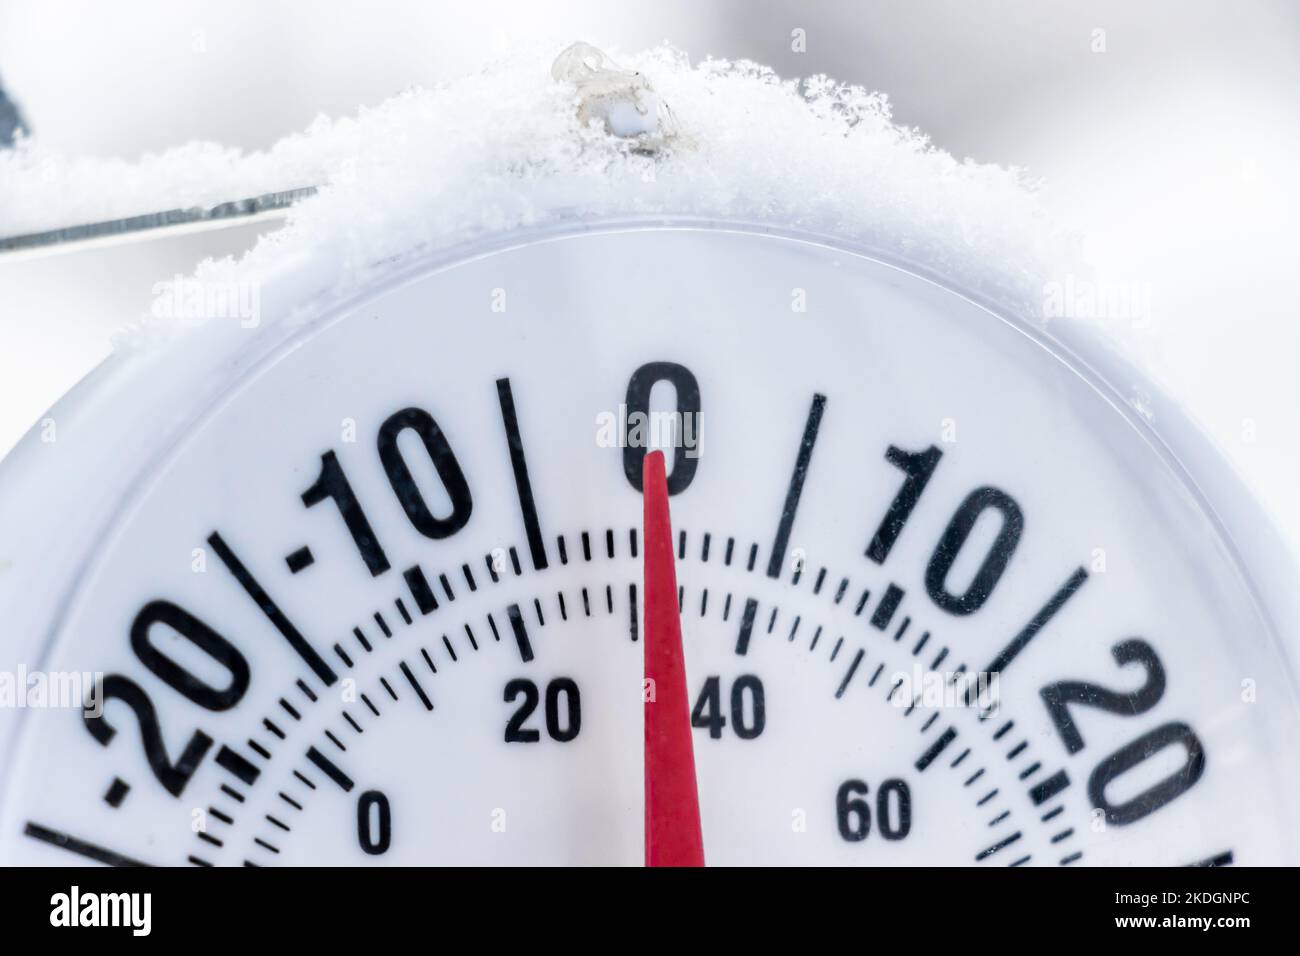 Outside thermometer showing lightly under frozen temperature, zero Celcius degrees or minus 32 Farhenheit. Winter snowing day. Stock Photo